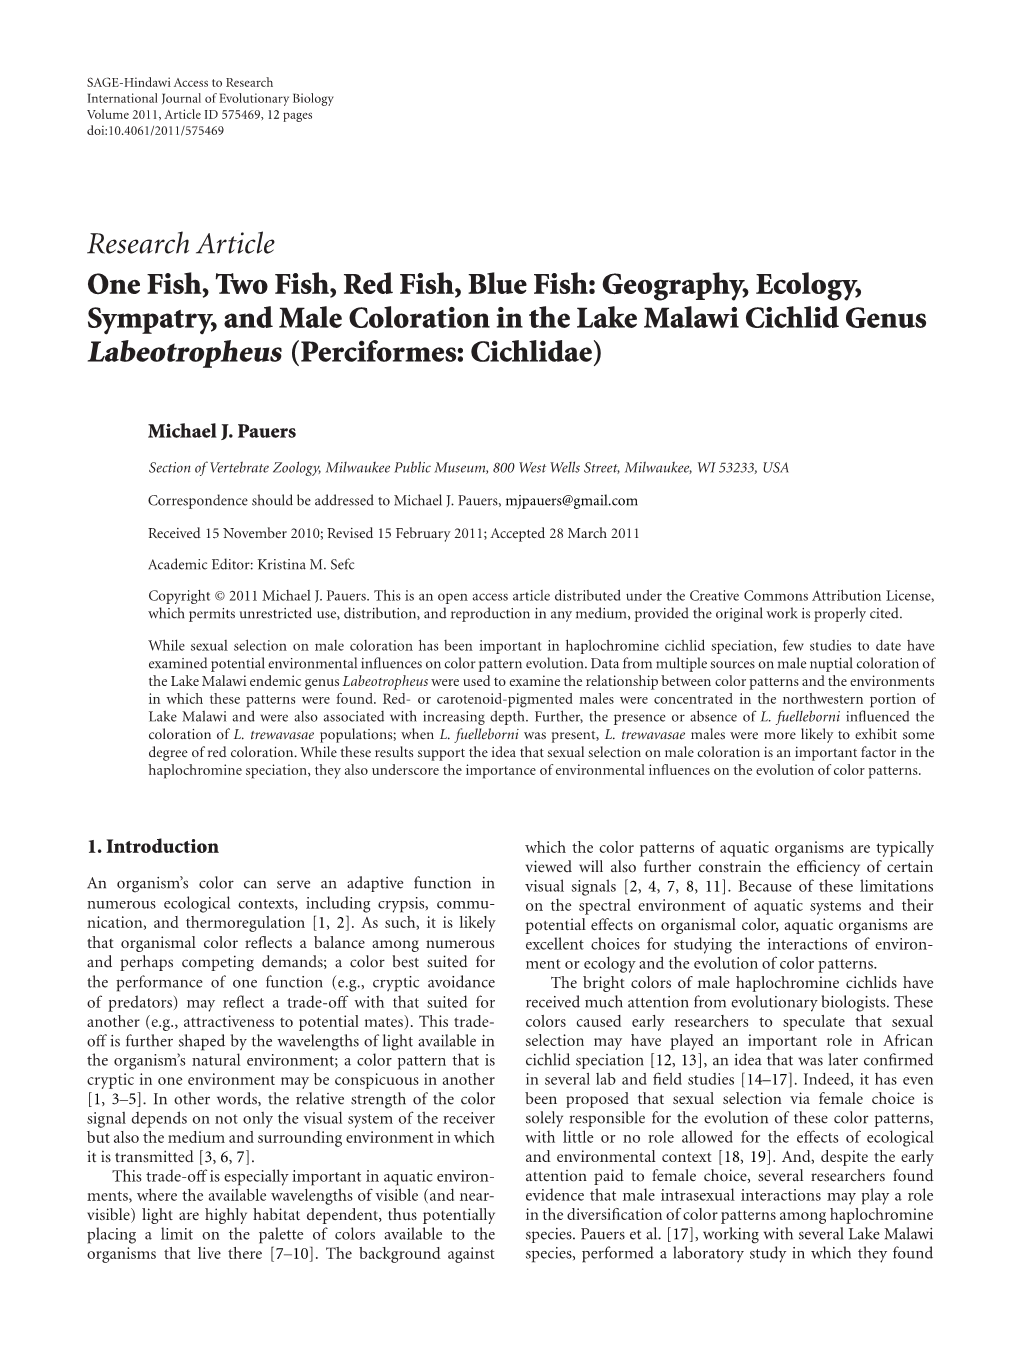 One Fish, Two Fish, Red Fish, Blue Fish: Geography, Ecology, Sympatry, and Male Coloration in the Lake Malawi Cichlid Genus Labeotropheus (Perciformes: Cichlidae)